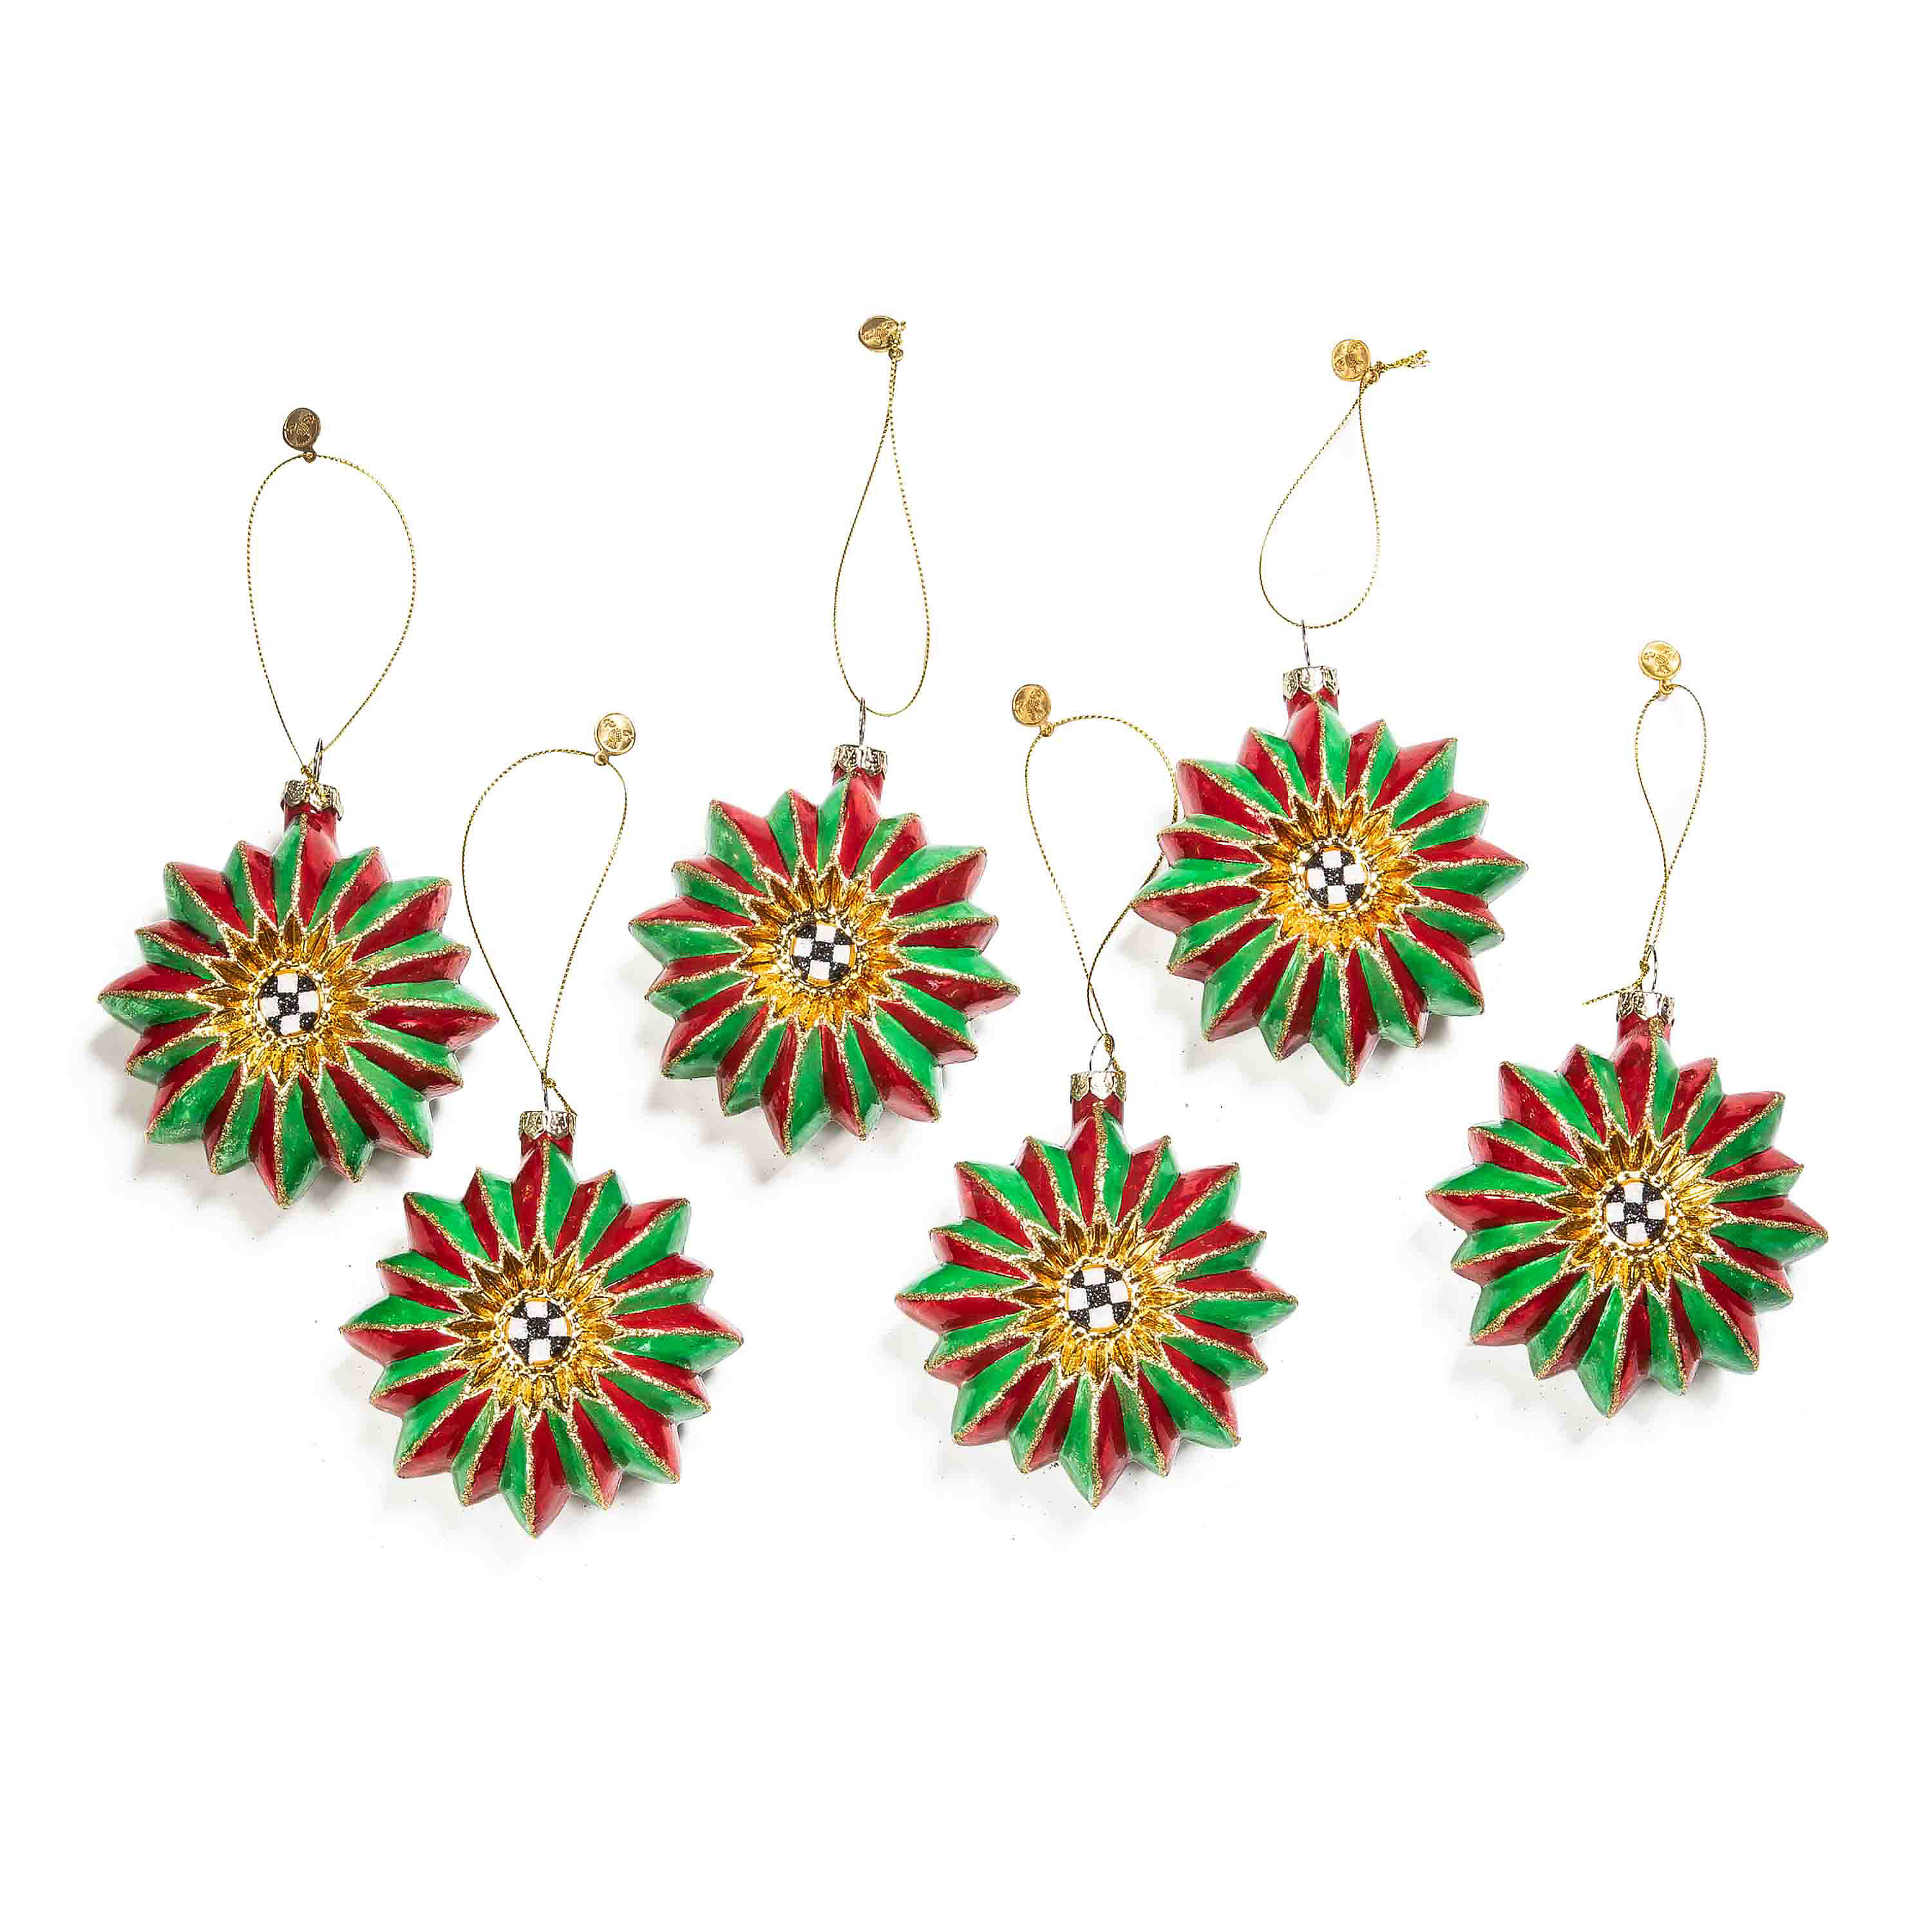 Red & Green Glass Reflector Ornaments, Set of 6 mackenzie-childs Panama 0